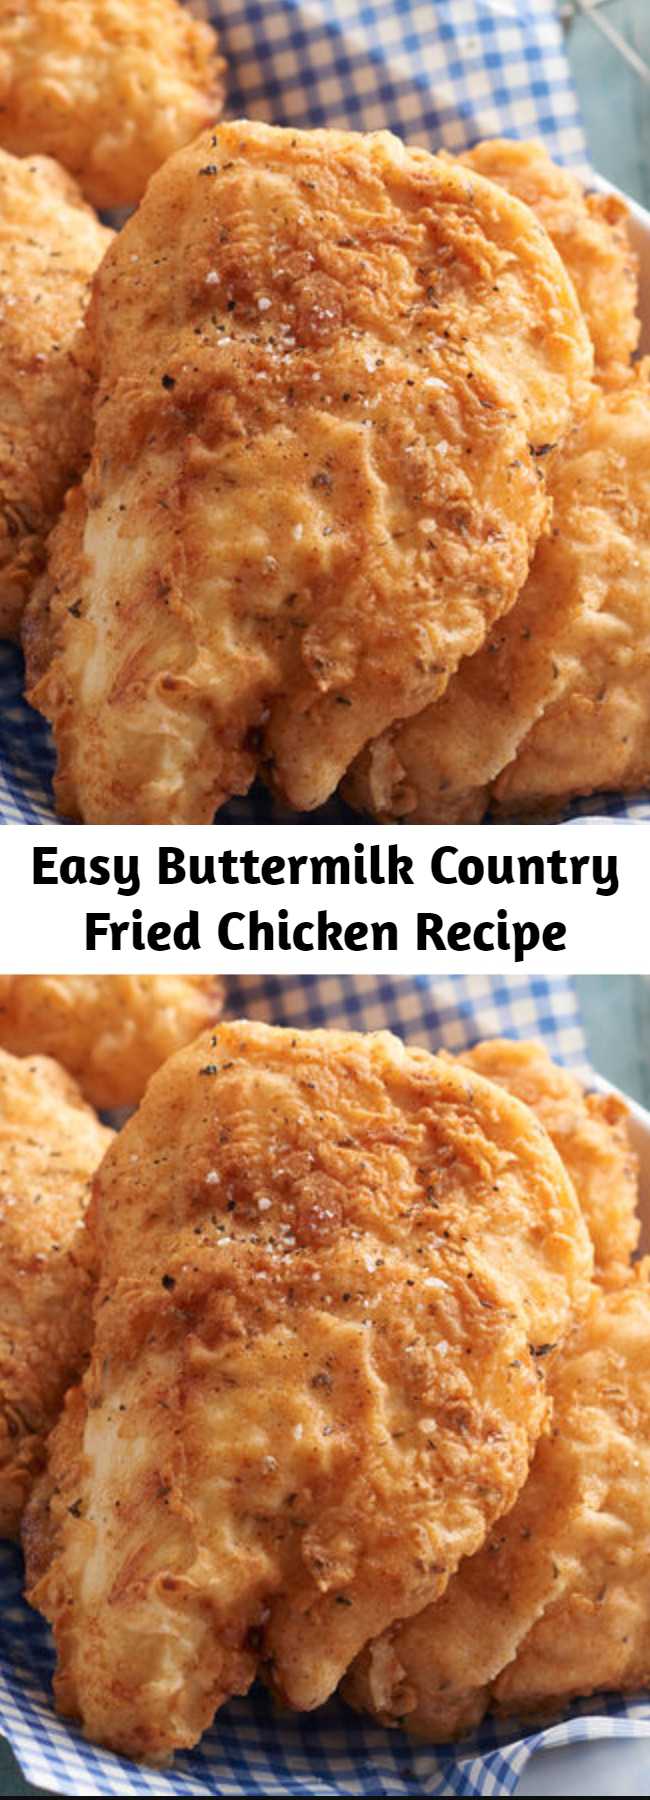 Easy Buttermilk Country Fried Chicken Recipe - The secret to this juicy and tender fried chicken lies in the simple buttermilk marinade. The crisp crust has a delicious hint of thyme.